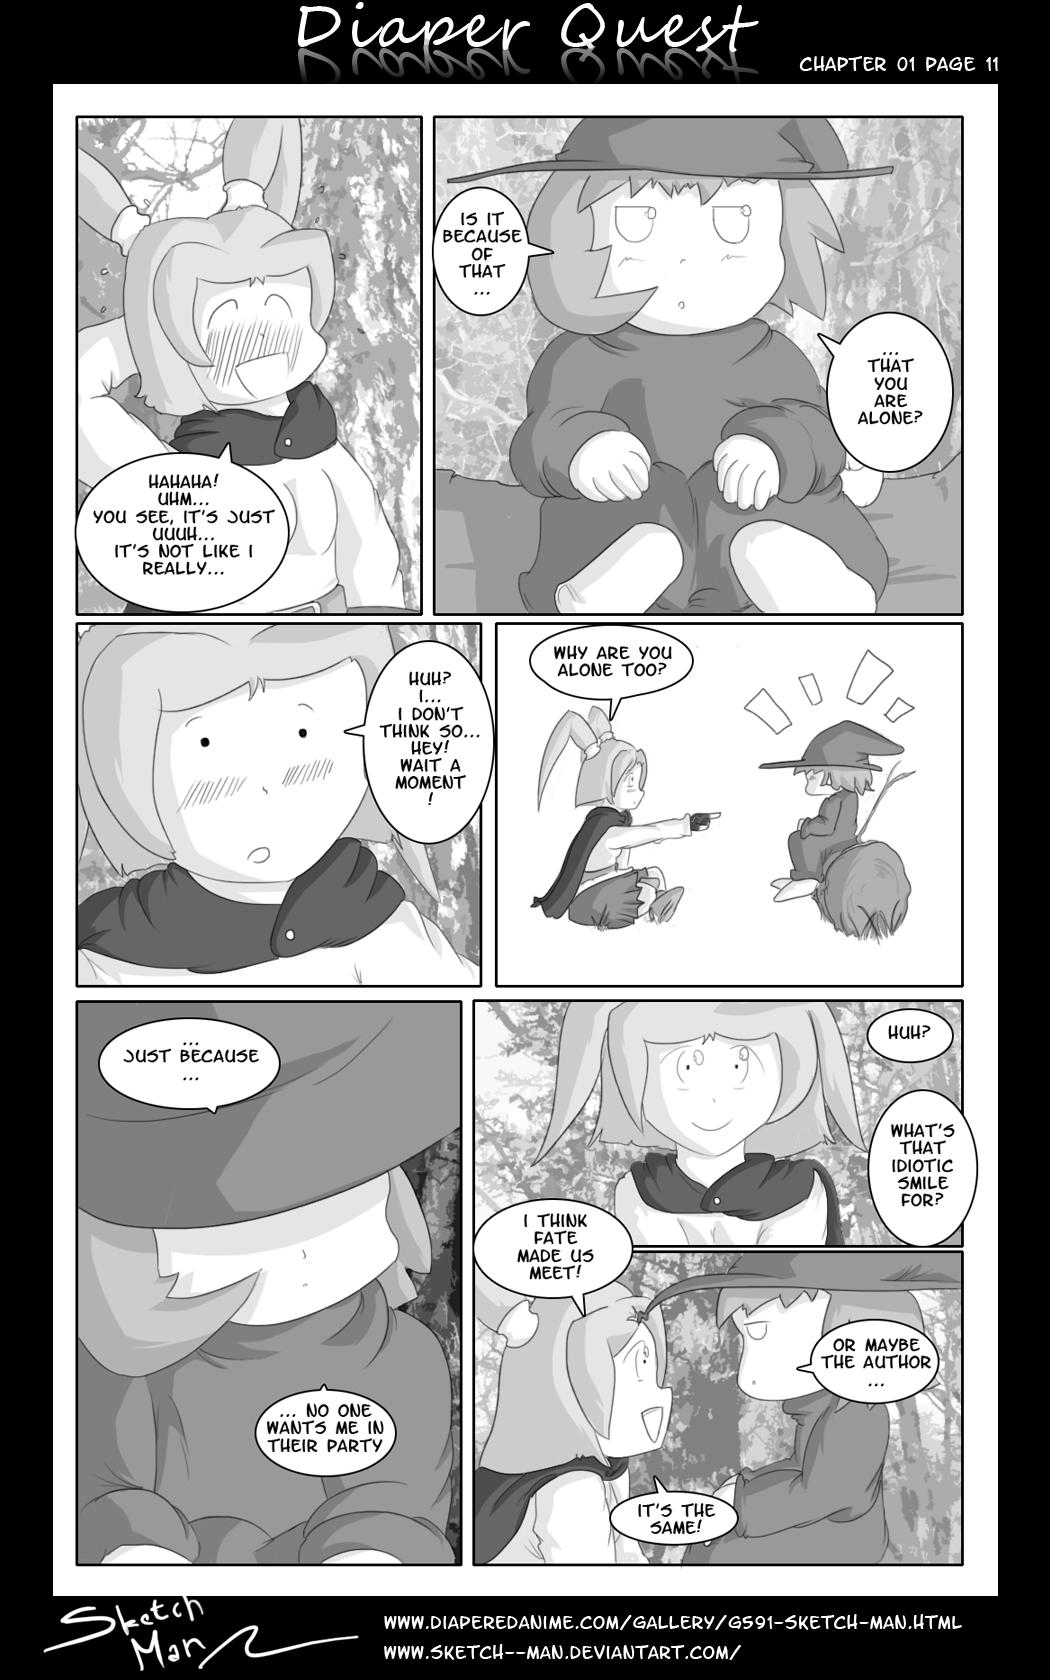 Doublepenetration Sketch Man's Diaper Quest Complete Handjobs - Page 11